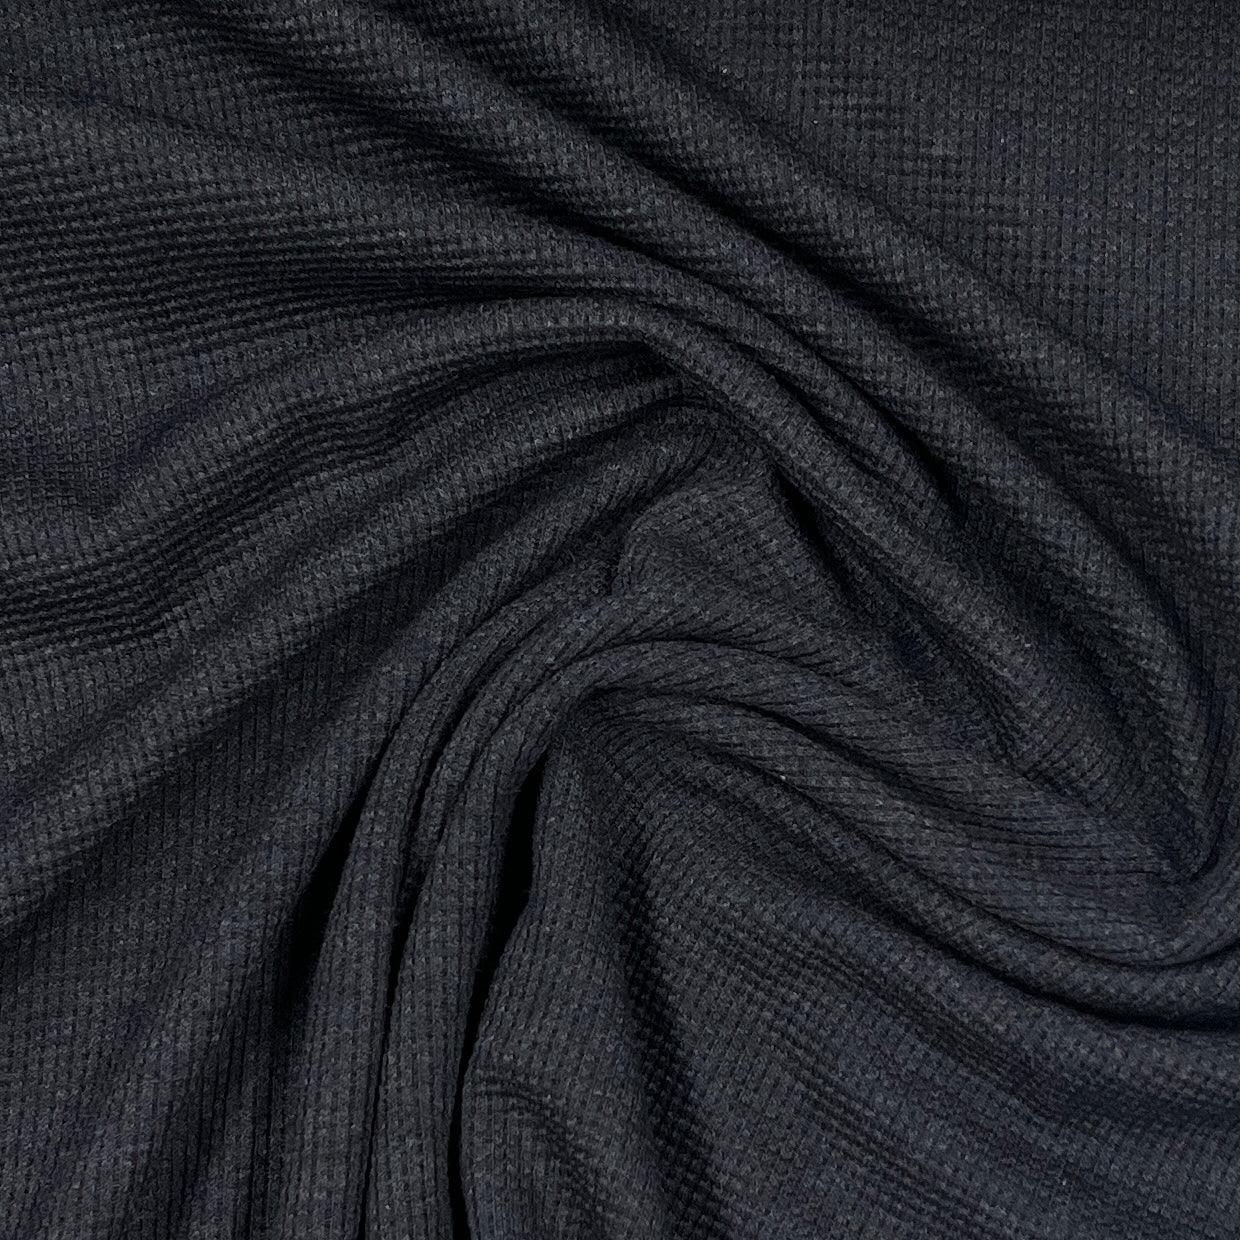 Ithaca Blue Rayon/Spandex Thermal Fabric - Nature's Fabrics